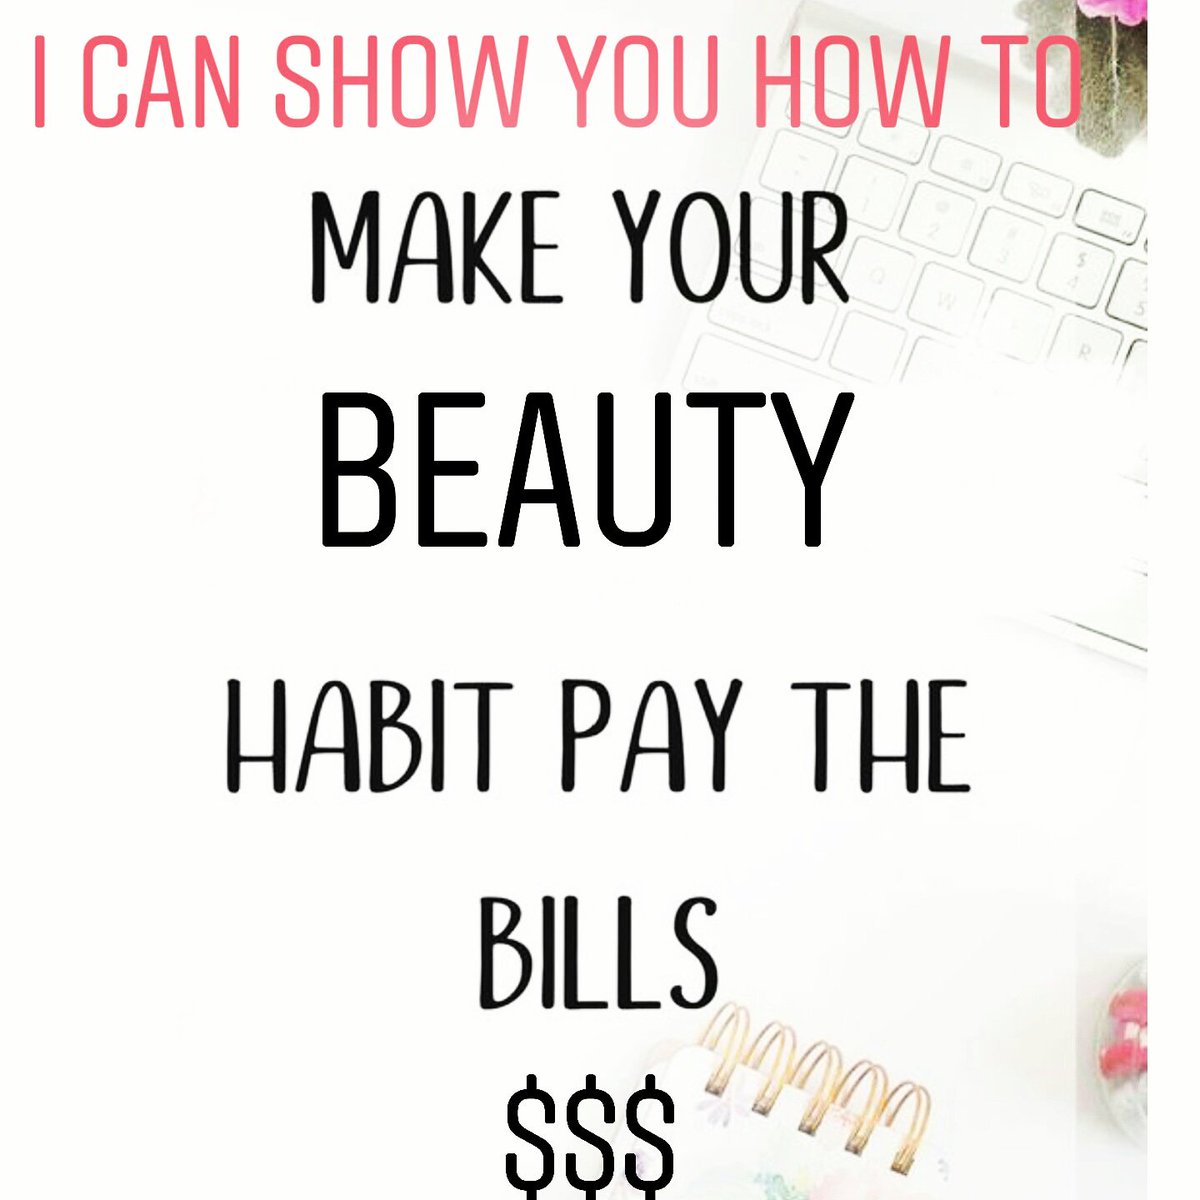 Beauty Pays💸💸!!  Join Me On the Opportunity Call on 6/21 @ 8pm.  Invite your friends😜😜👈 #beauty #residualincome #earnincome #coach #mentor #teambuilding #inspire #bosschics #inspire #mood #motivated #goals #life #health